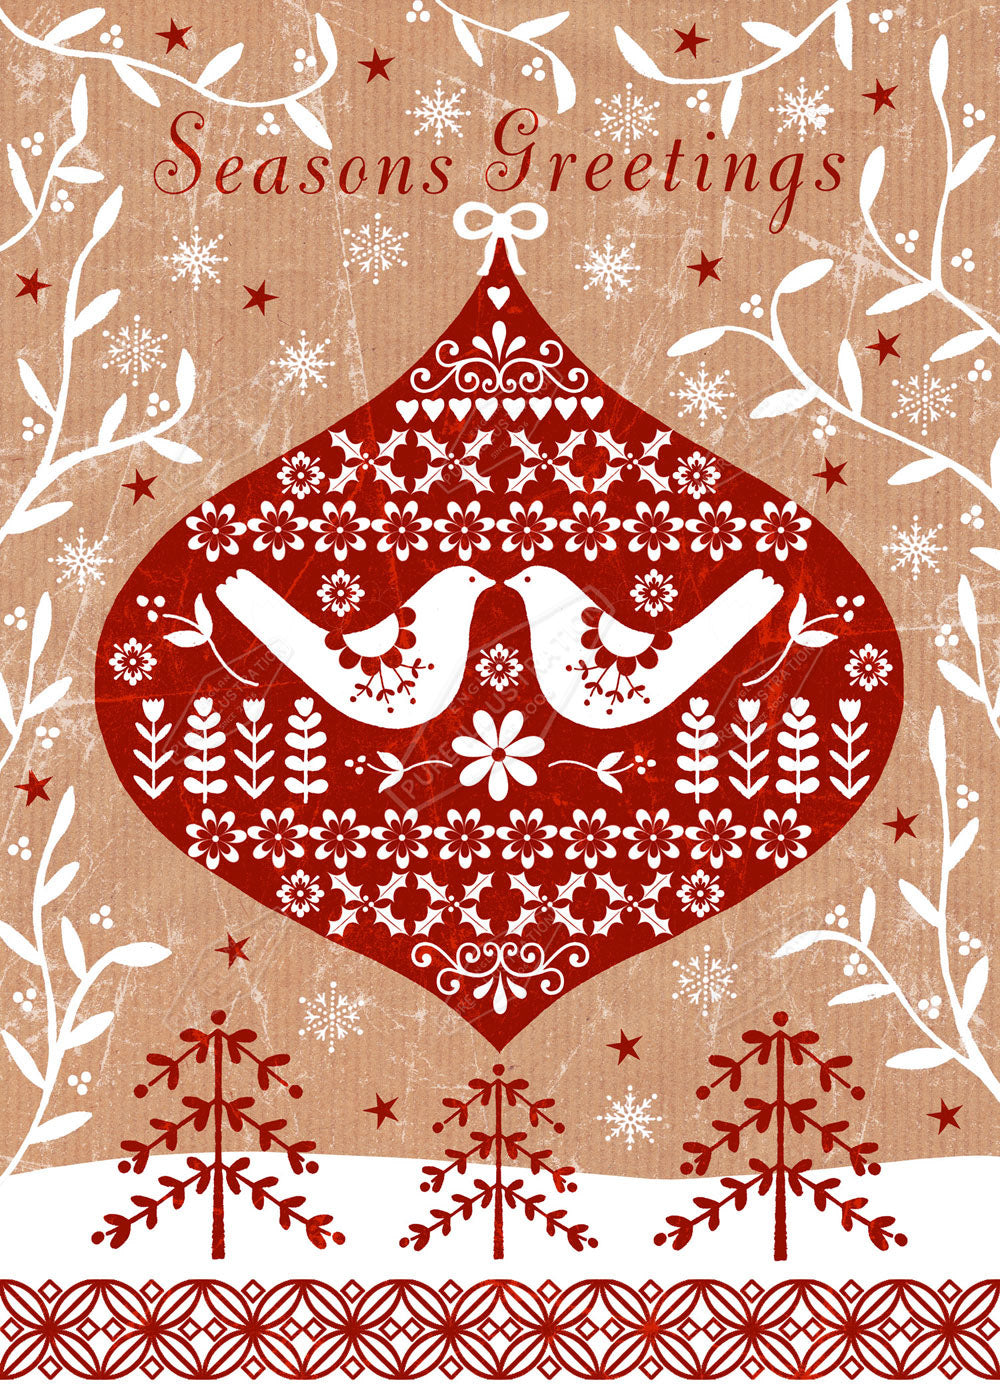 00021886SSN- Sian Summerhayes is represented by Pure Art Licensing Agency - Christmas Greeting Card Design